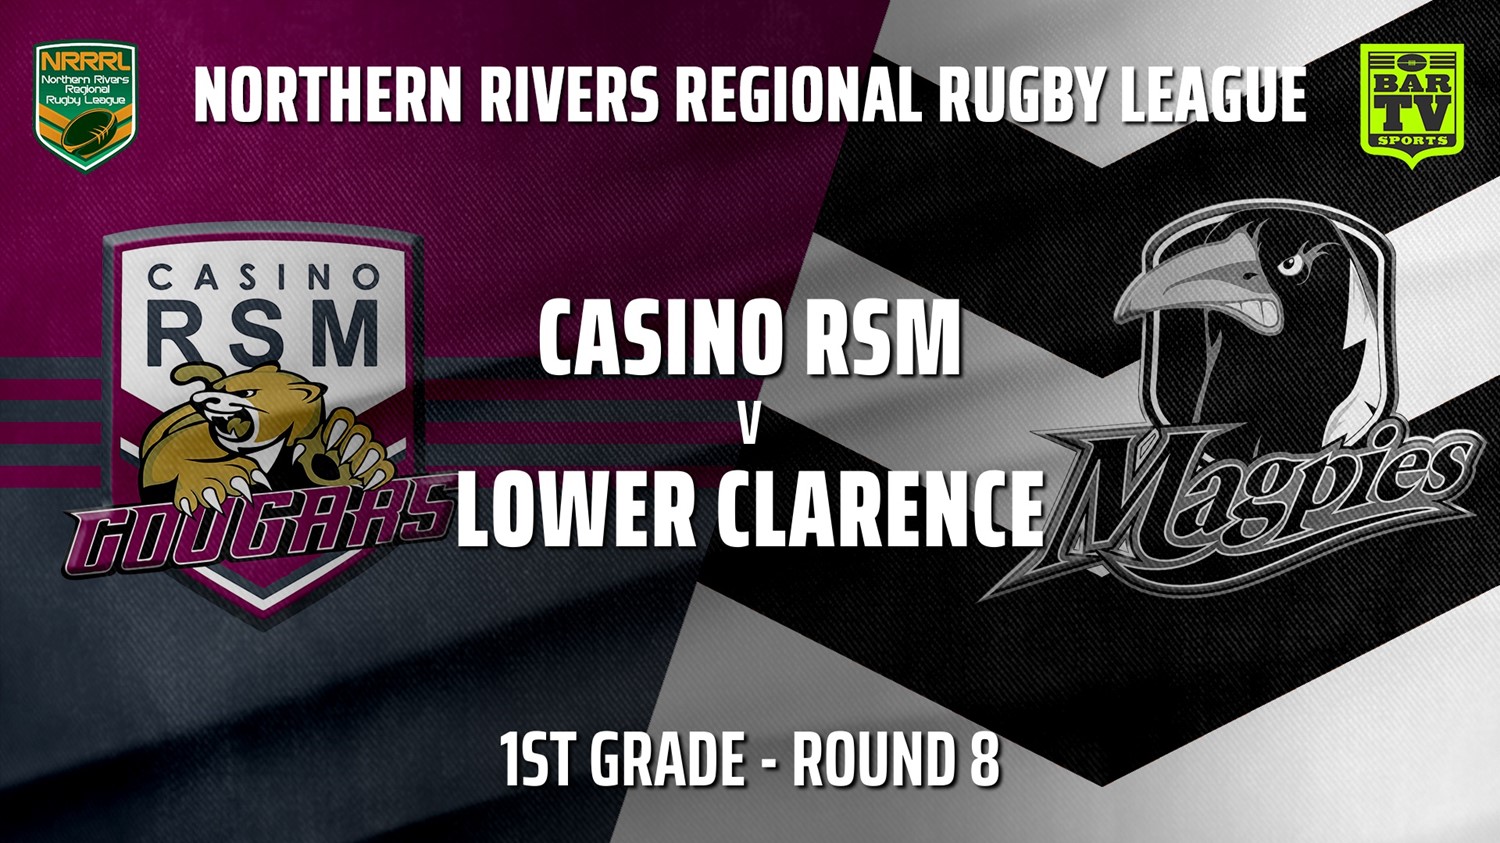 210704-Northern Rivers Round 8 - 1st Grade - Casino RSM Cougars v Lower Clarence Magpies Slate Image